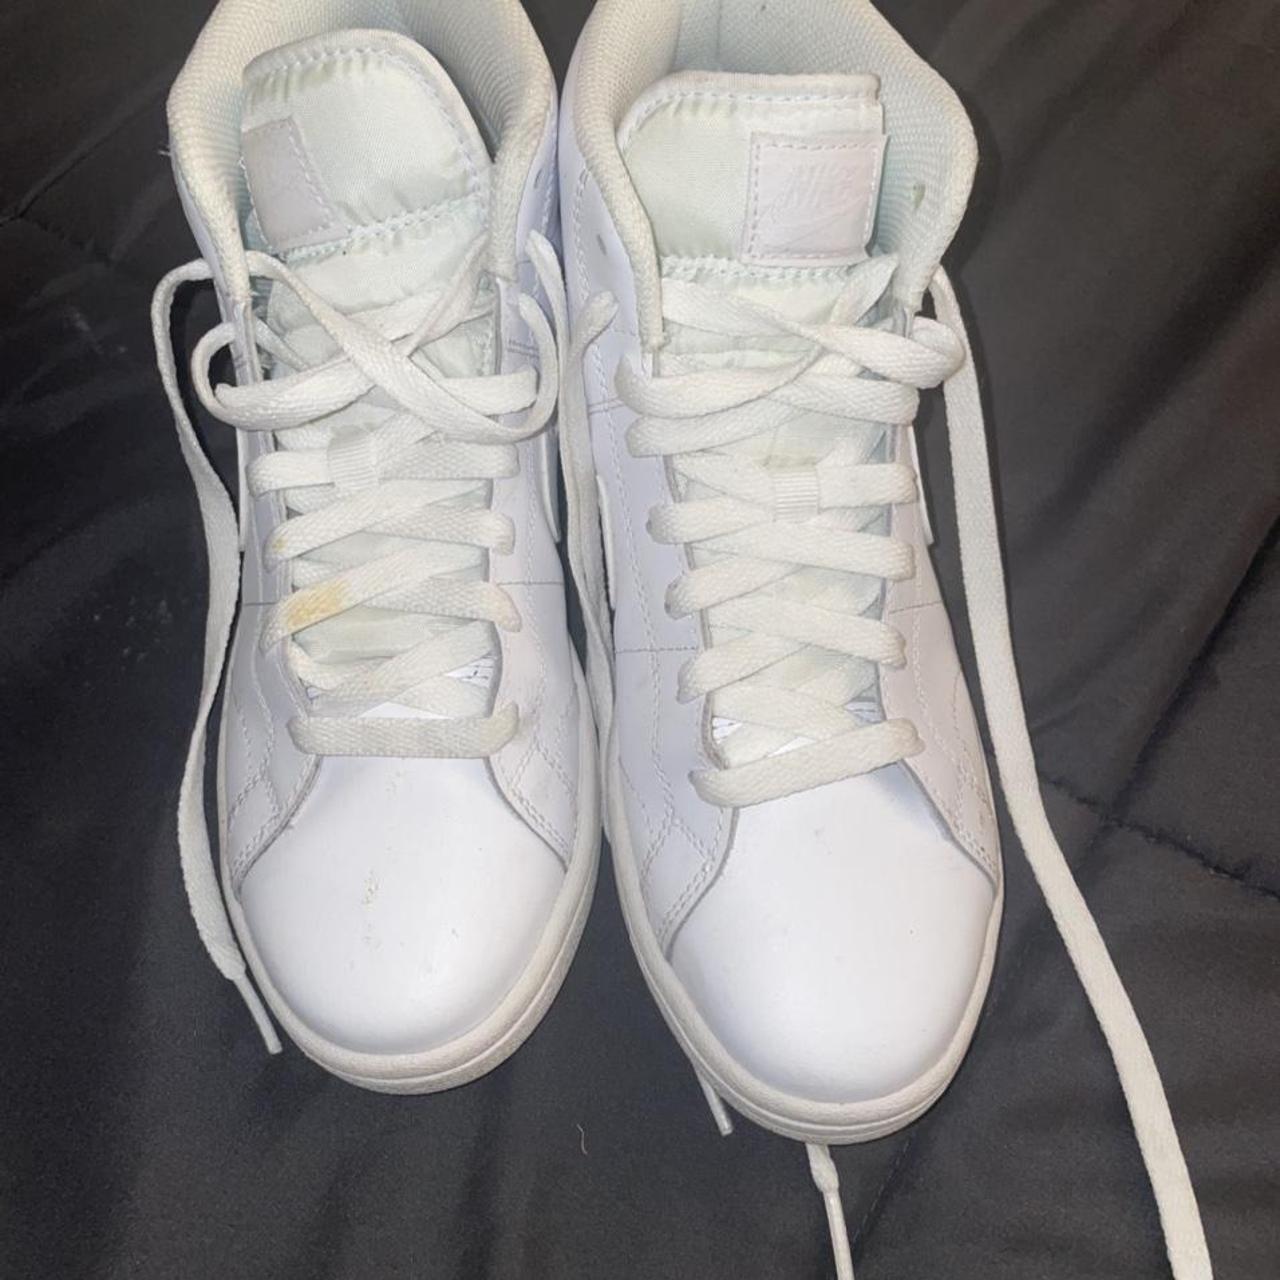 Womens Nike court royale 2 high top sneakers. Size... - Depop